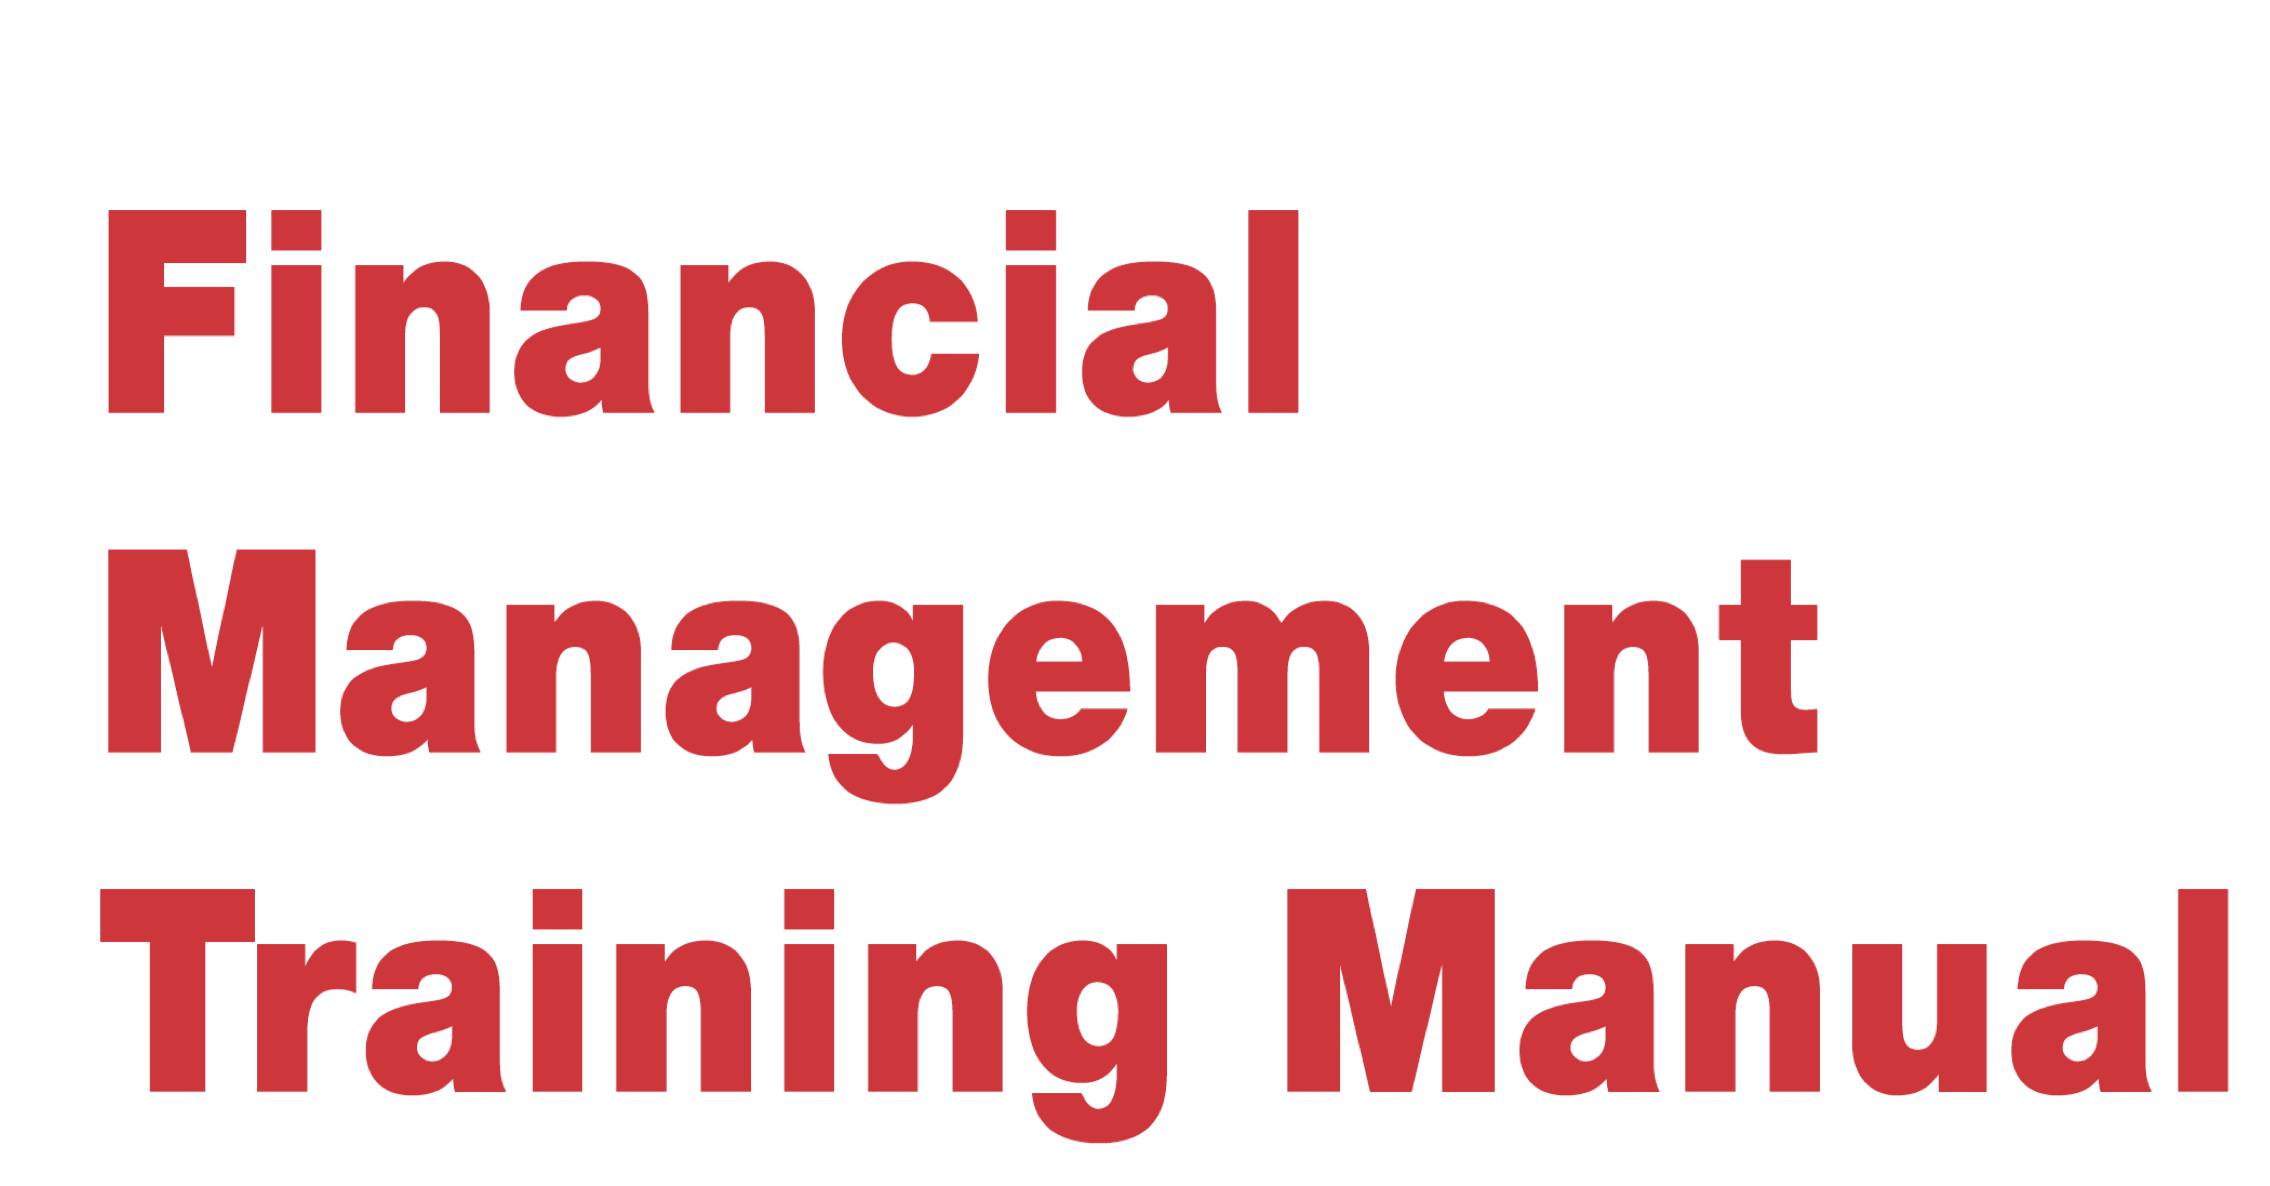 Financial Management Training Manual: Enhancing the Sustainability and Profitability of the Carpet and Pashmina Industries in the Kathmandu Valley